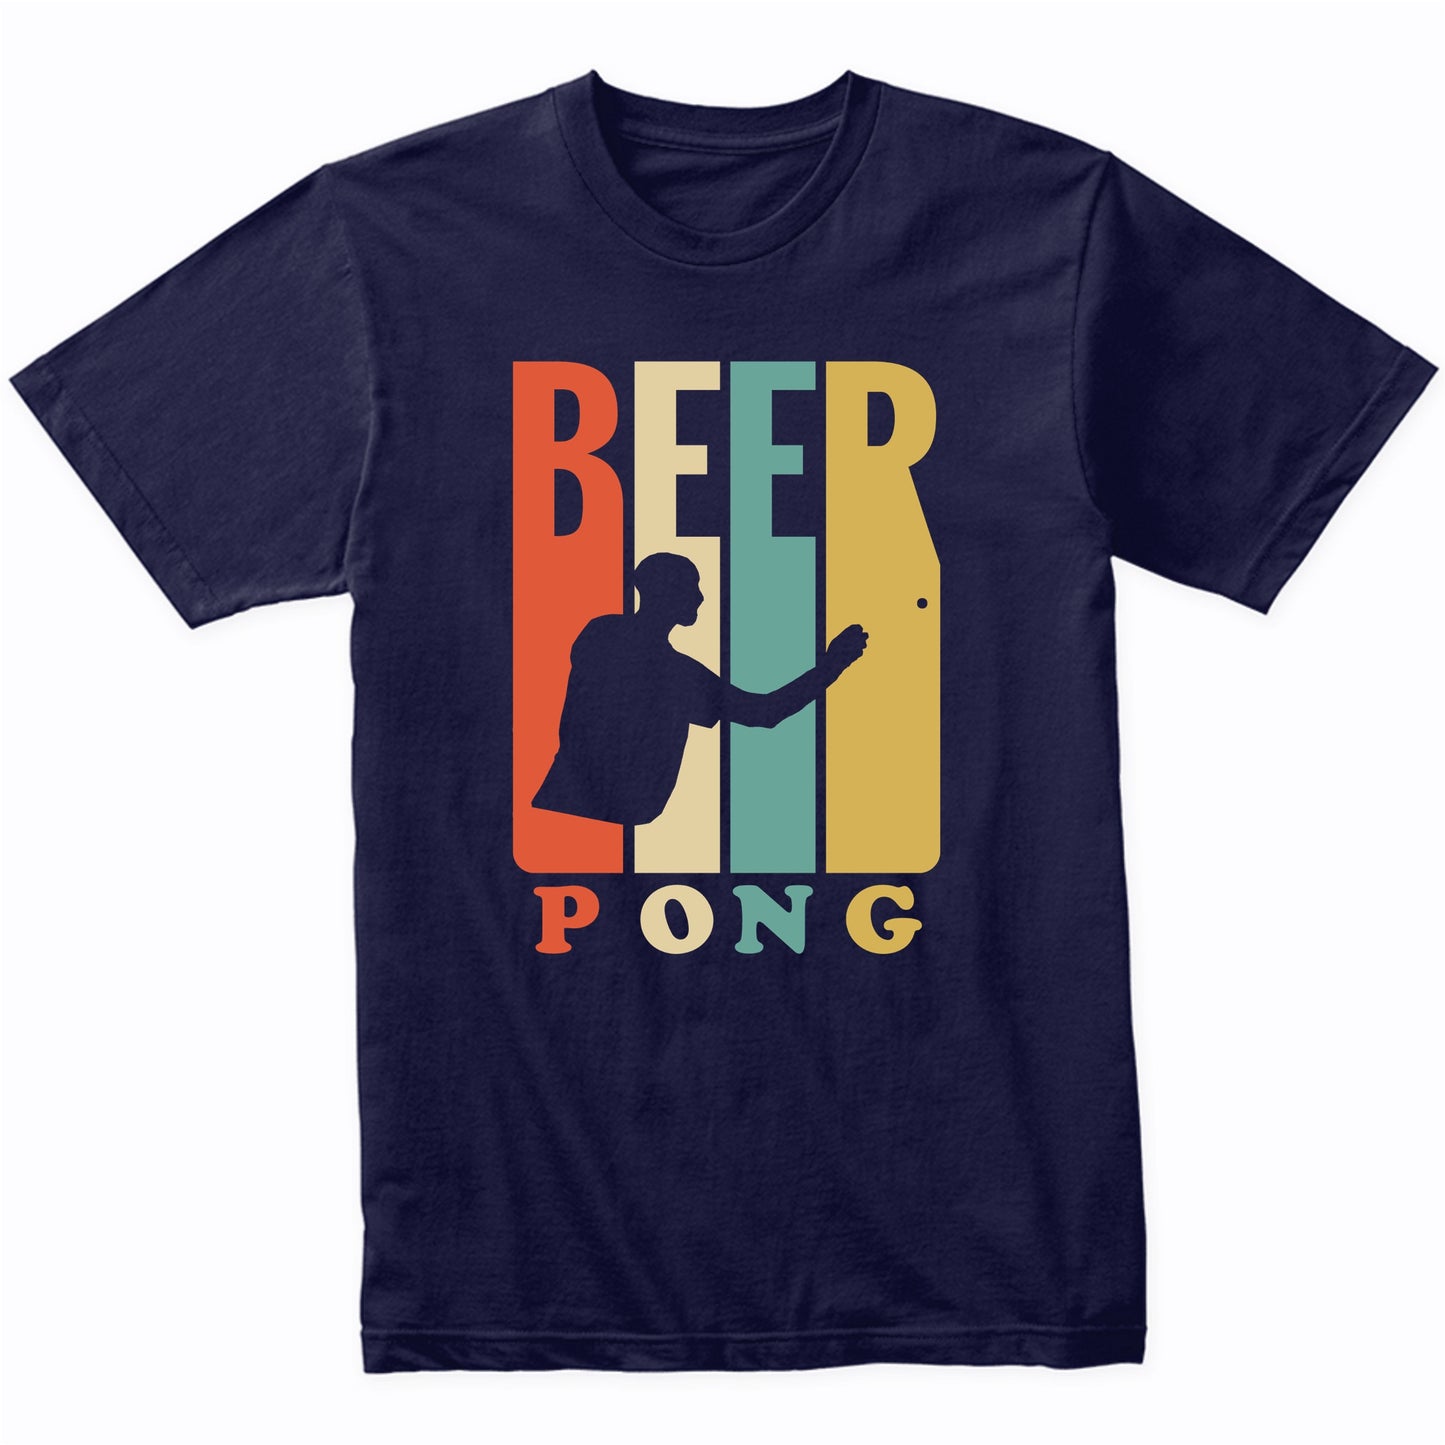 Vintage Retro 1970's Style Beer Pong T-Shirt